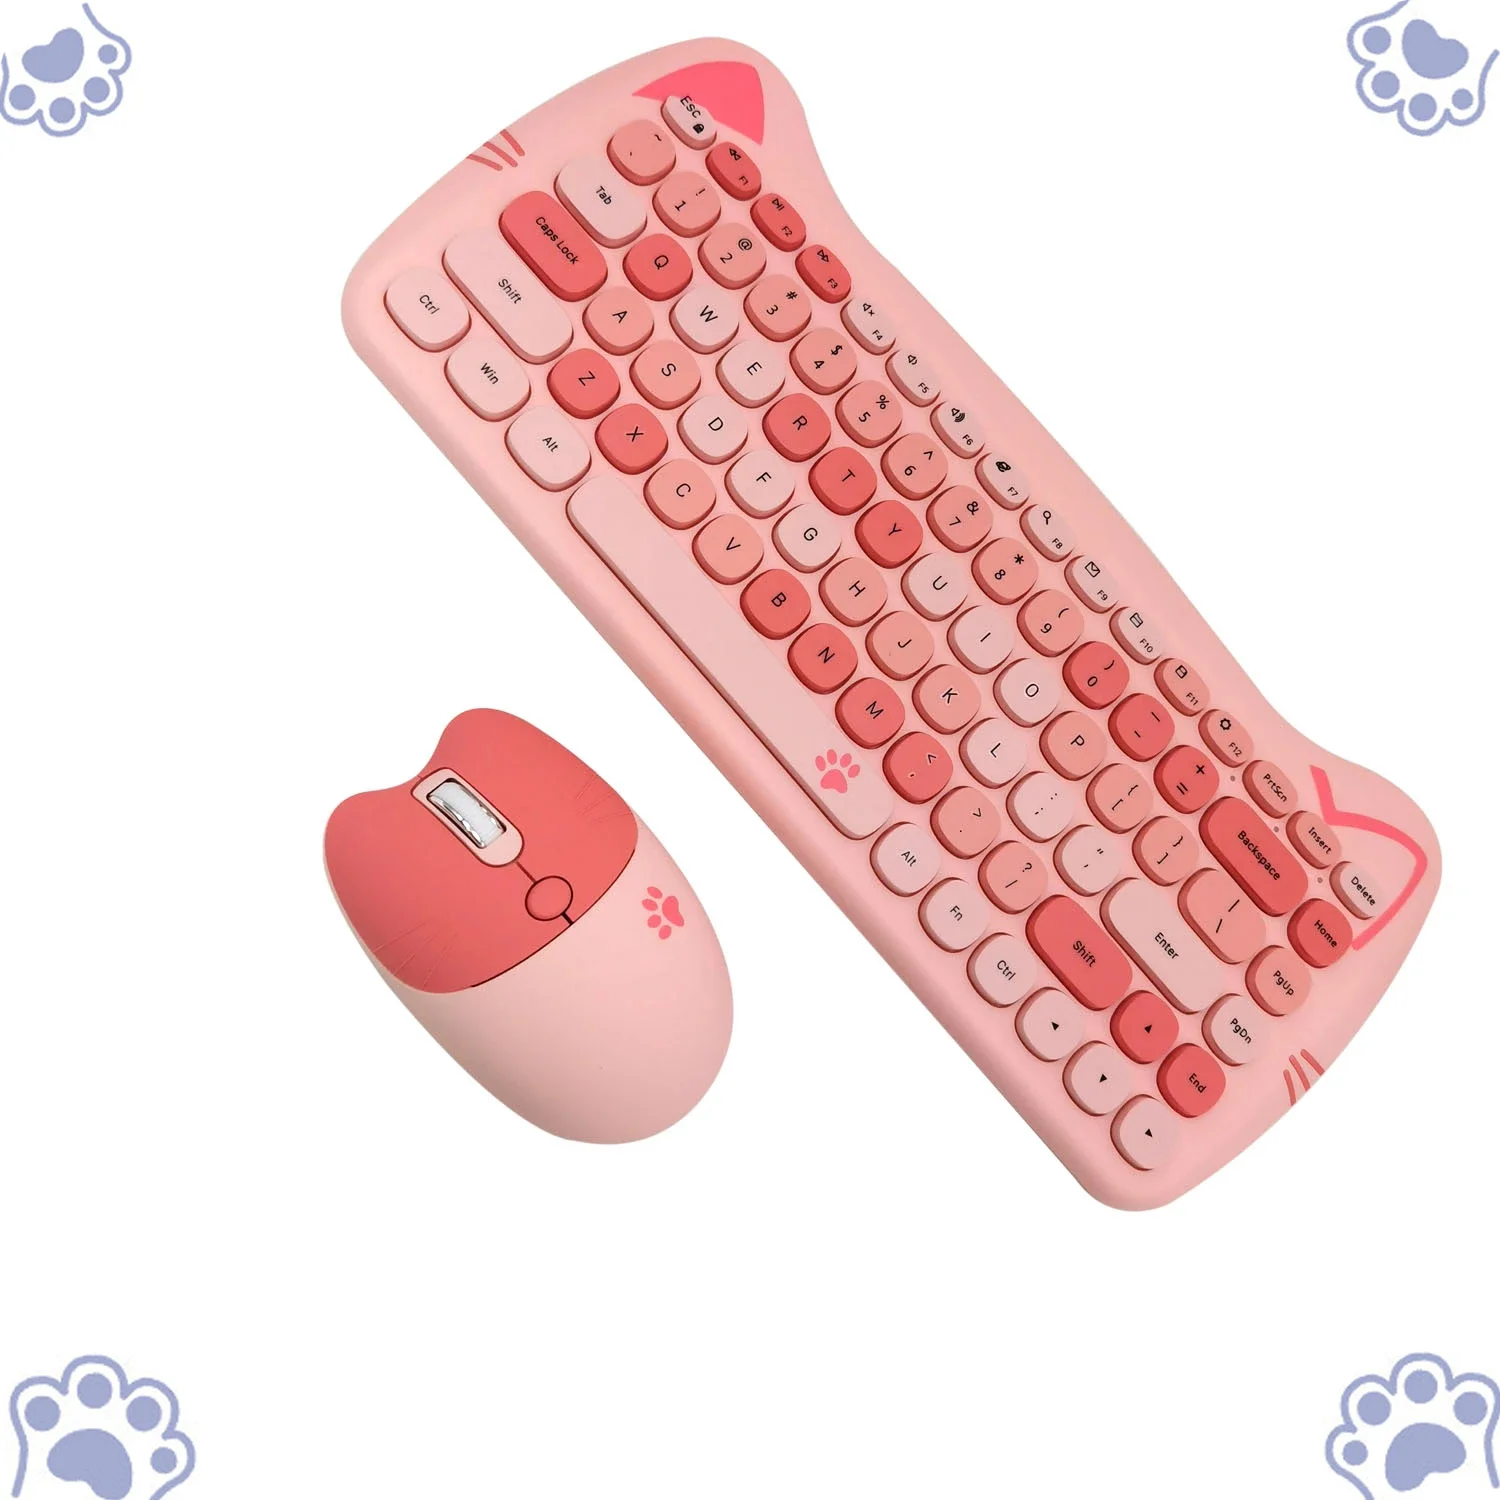 Enlarge 2.4G Wireless Keyboard Mouse Combos Creative Cute Pink Keyboards and Mouse Set For Home Office Girl Gifts Laptop PC Gamer Kit